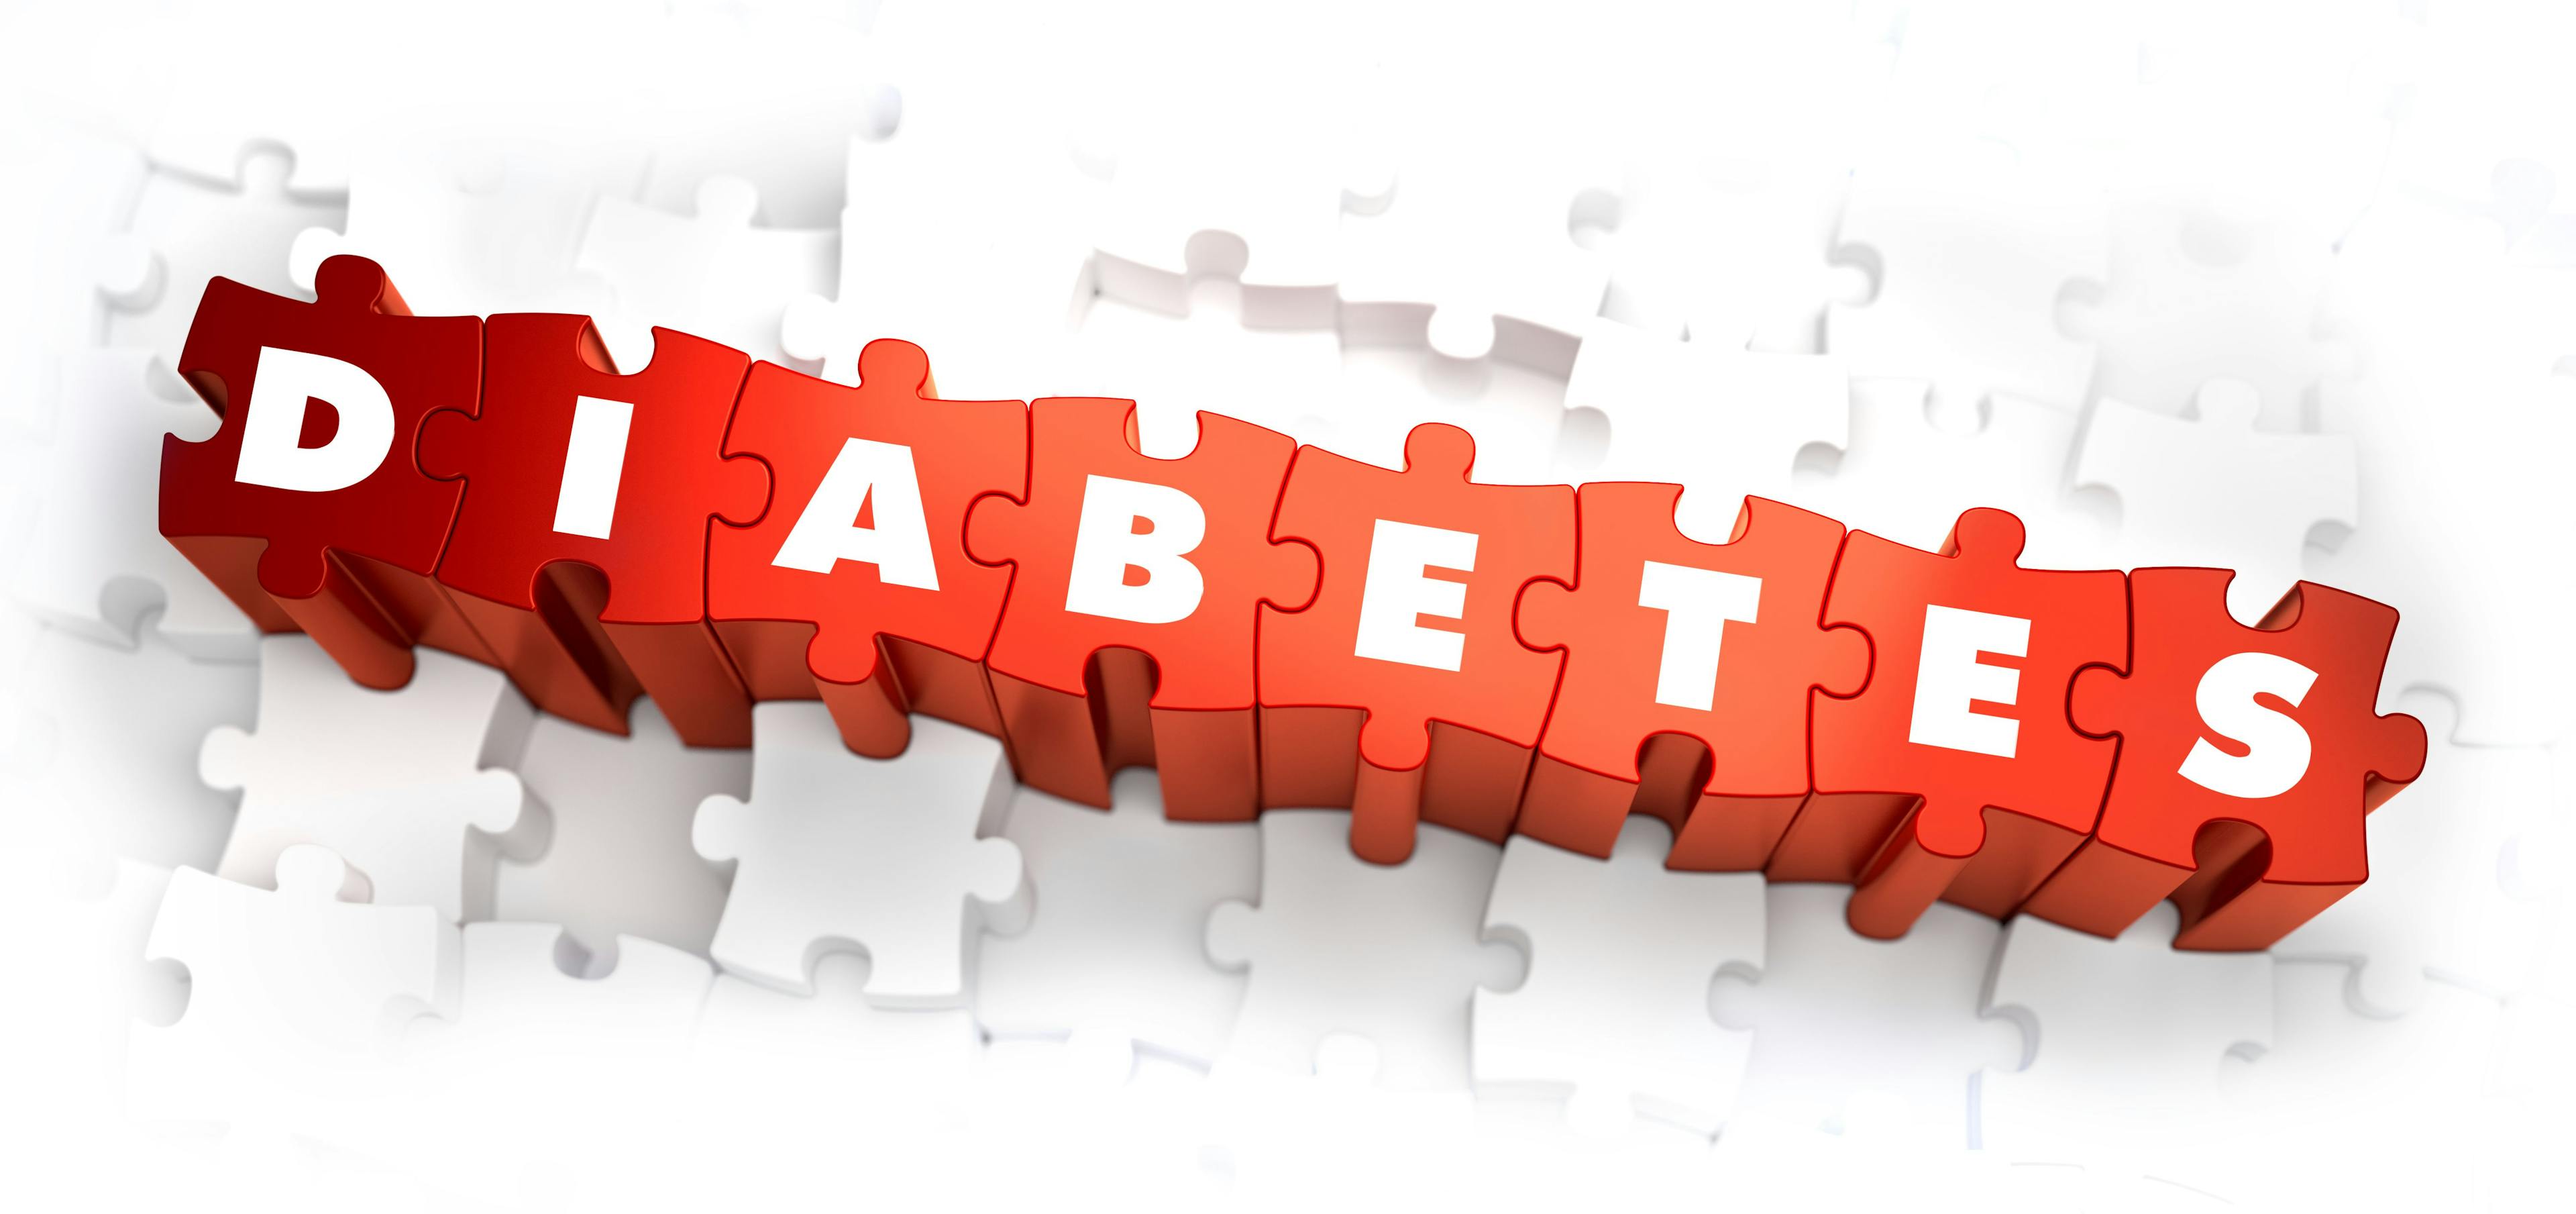 Diabetes news you may have missed